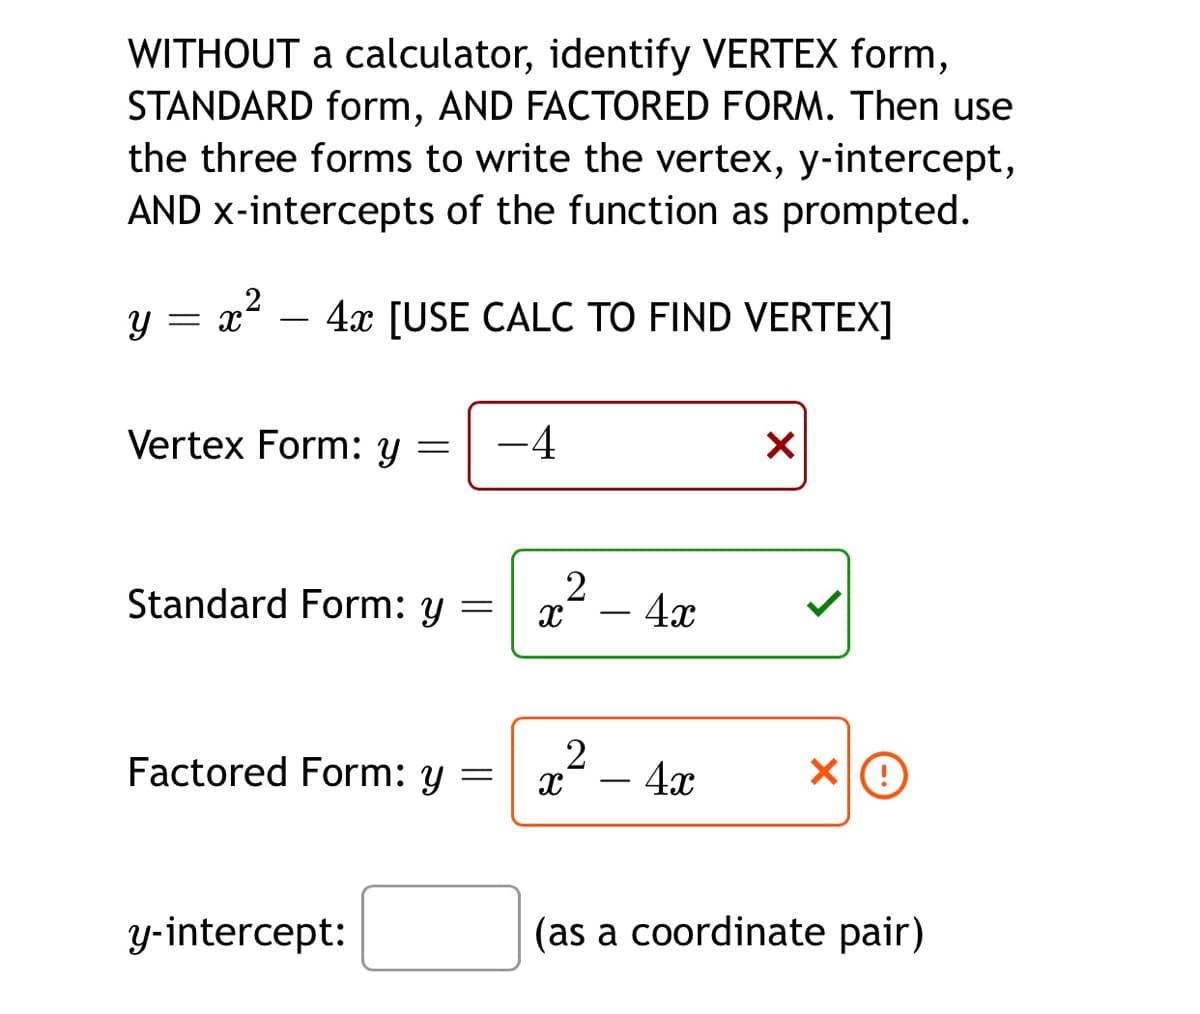 WITHOUT a calculator, identify VERTEX form,
STANDARD form, AND FACTORED FORM. Then use
the three forms to write the vertex, y-intercept,
AND x-intercepts of the function as prompted.
4x [USE CALC TO FIND VERTEX]
-
Vertex Form: y =
-4
Standard Form: y
x-
- 4x
-
Factored Form: y
2
- 4x
-
y-intercept:
(as a coordinate pair)
